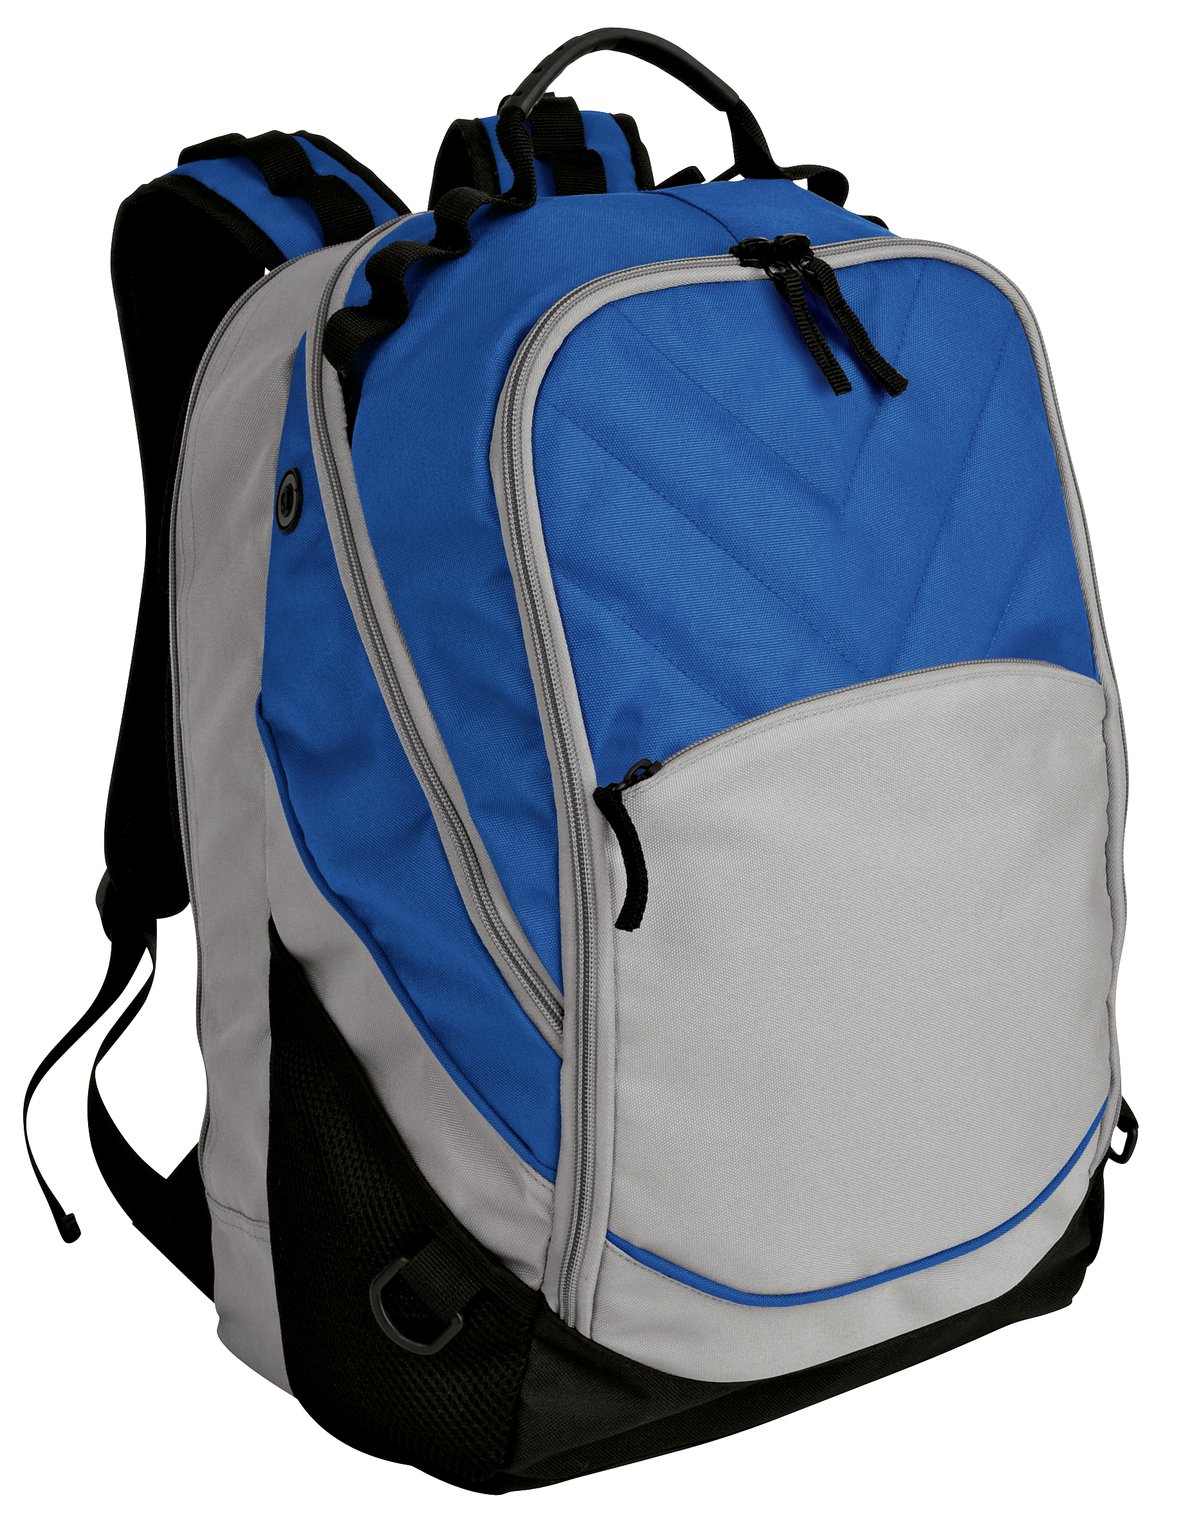 Port Authority Xcape Computer Backpack. BG100